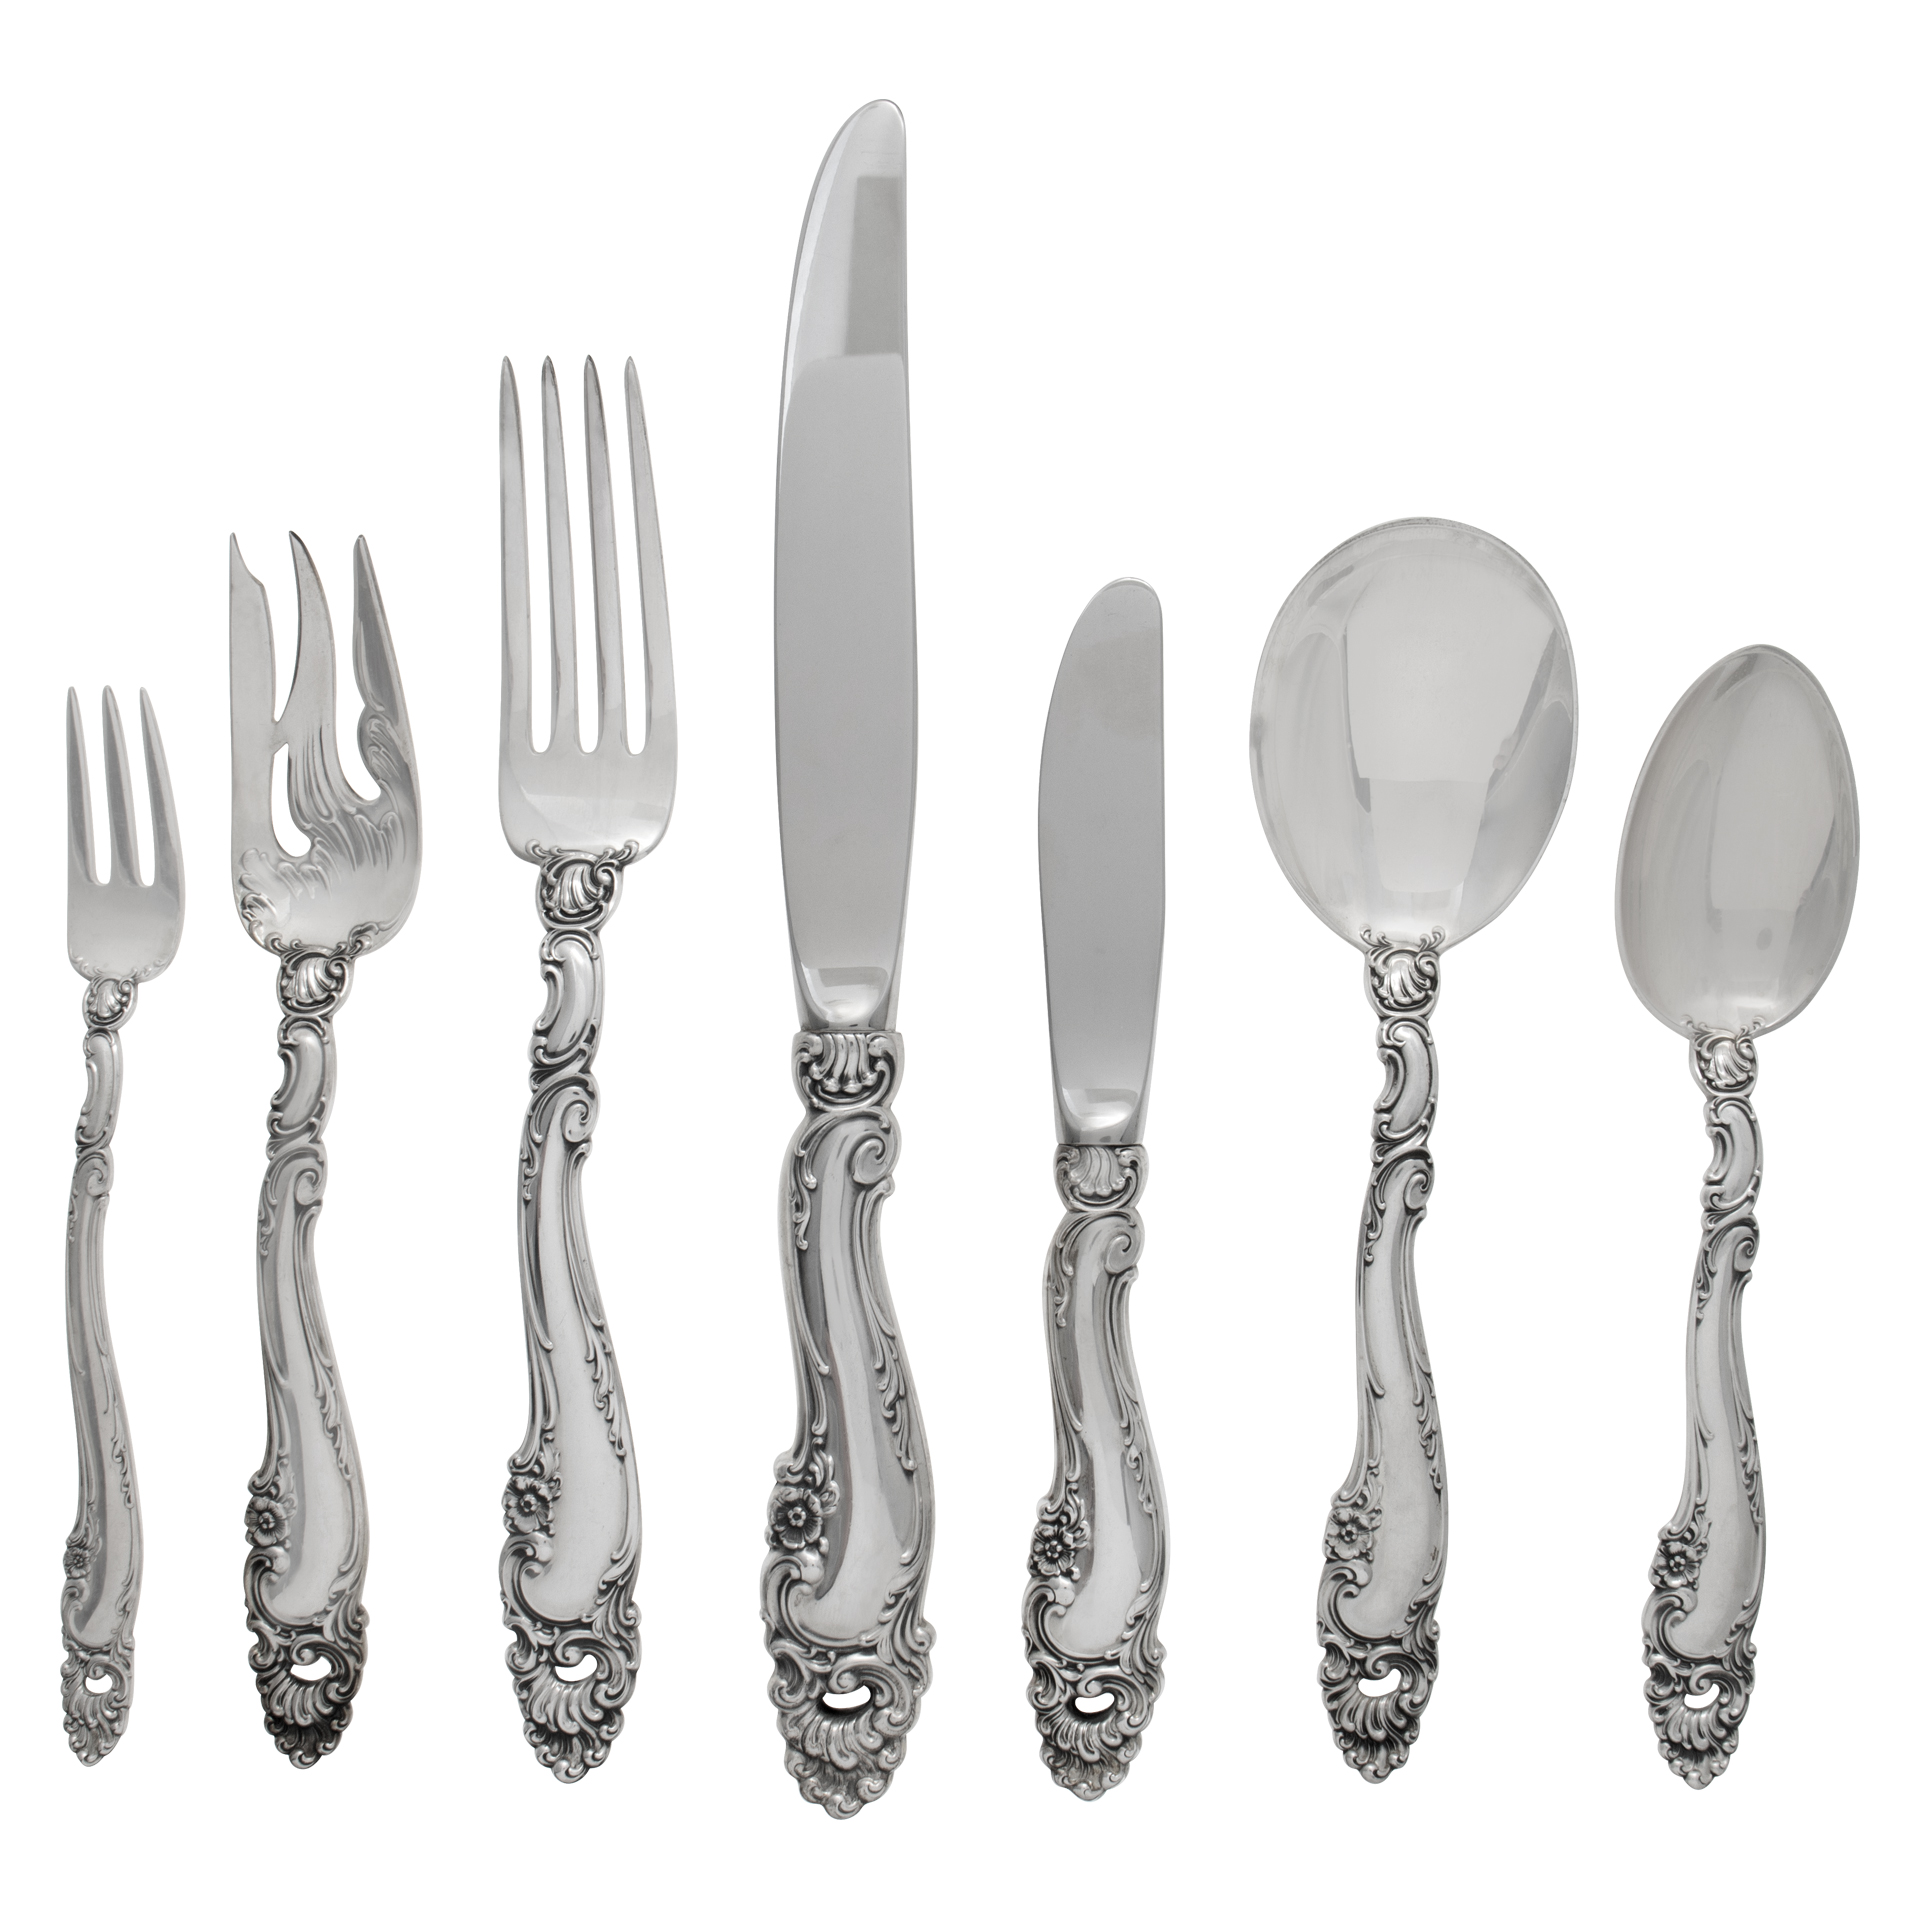 "DECOR" Sterling Silver Flatware Set, Ptd By Gorham in 1953- TOTAL 98 PIECES